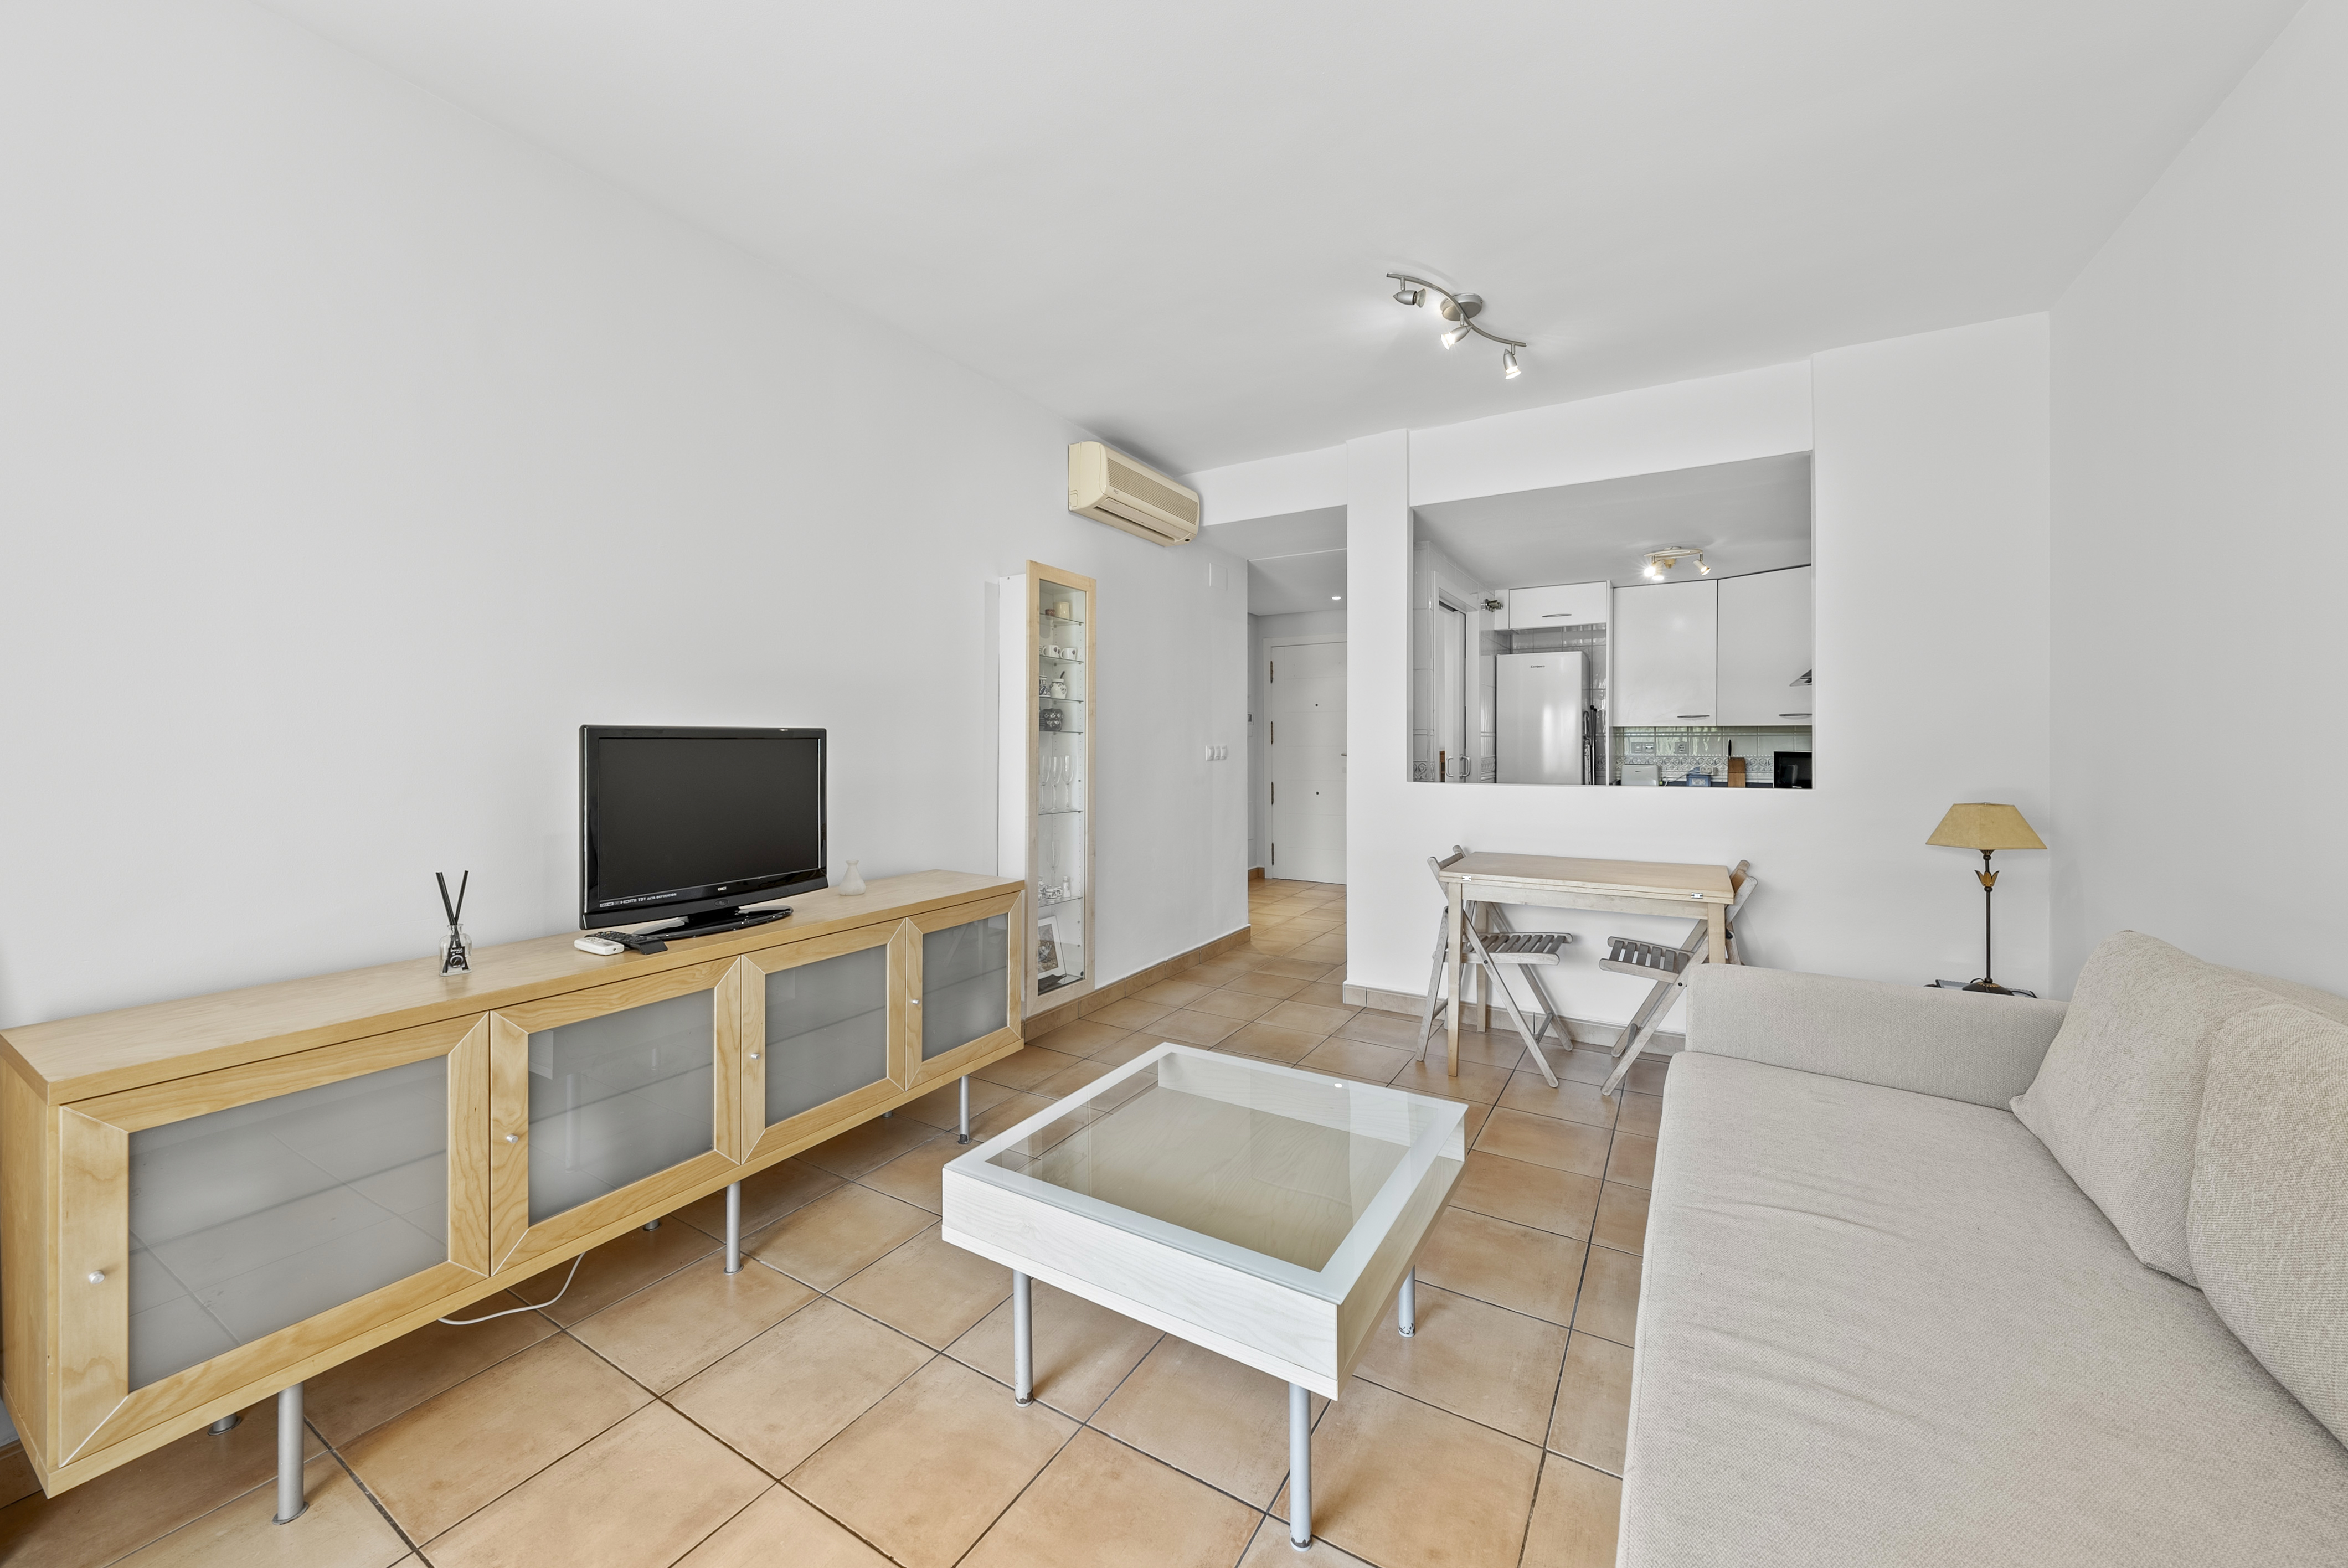 Exclusive Apartment on the Island of Altea: Discover your Unique Space